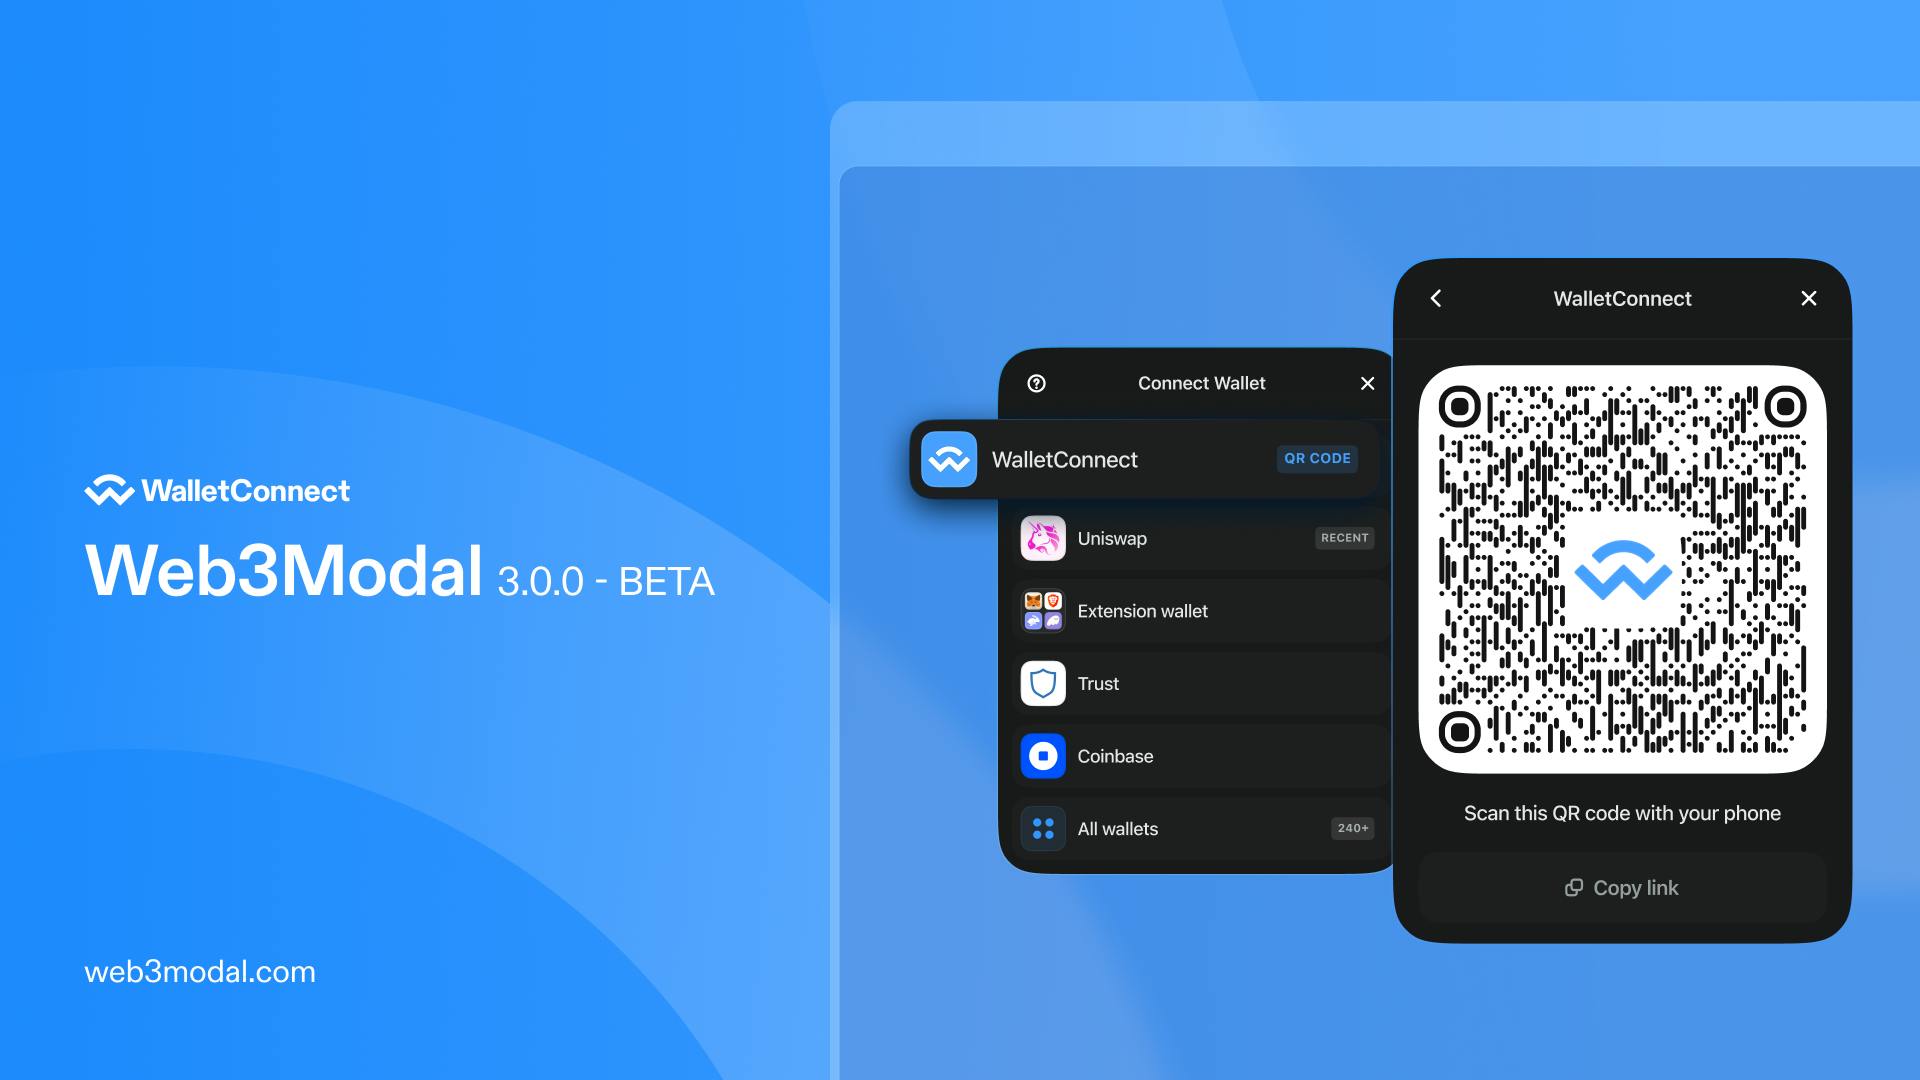 The Web3Modal wallet selection interface and QR code